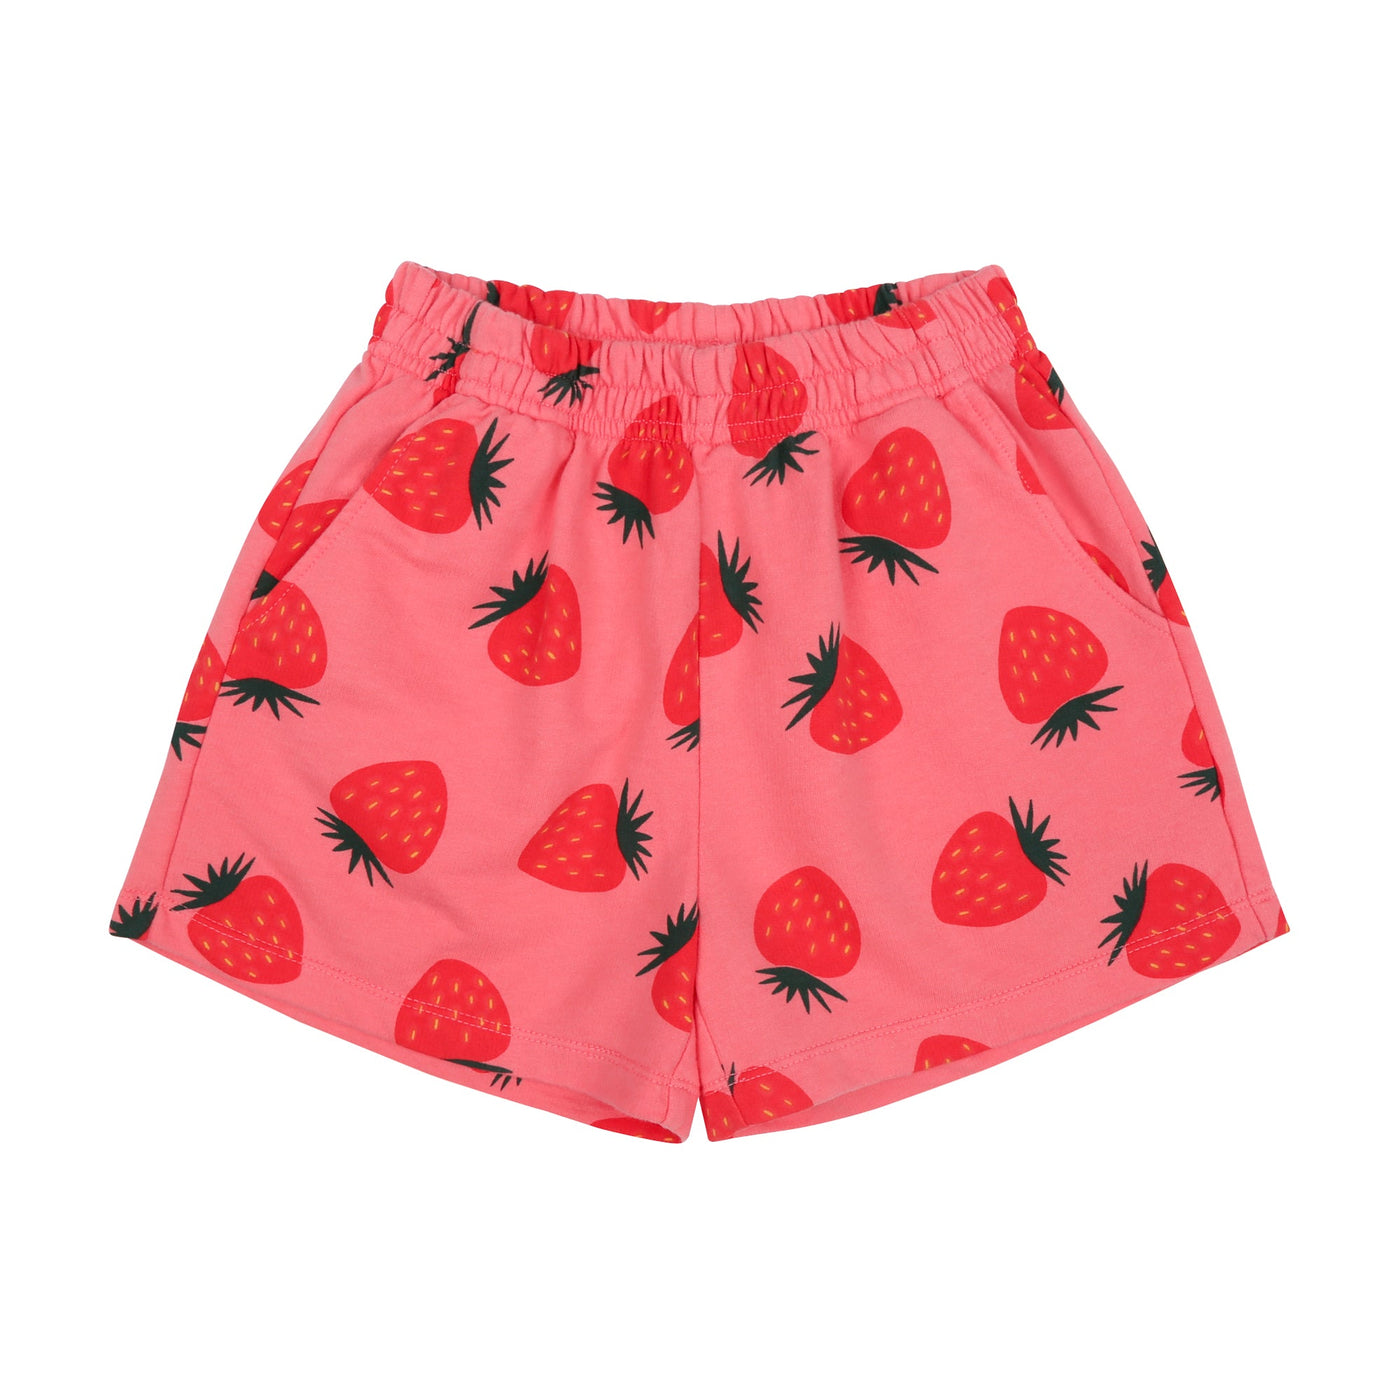 Fraise Shorts by Jelly Mallow - Petite Belle